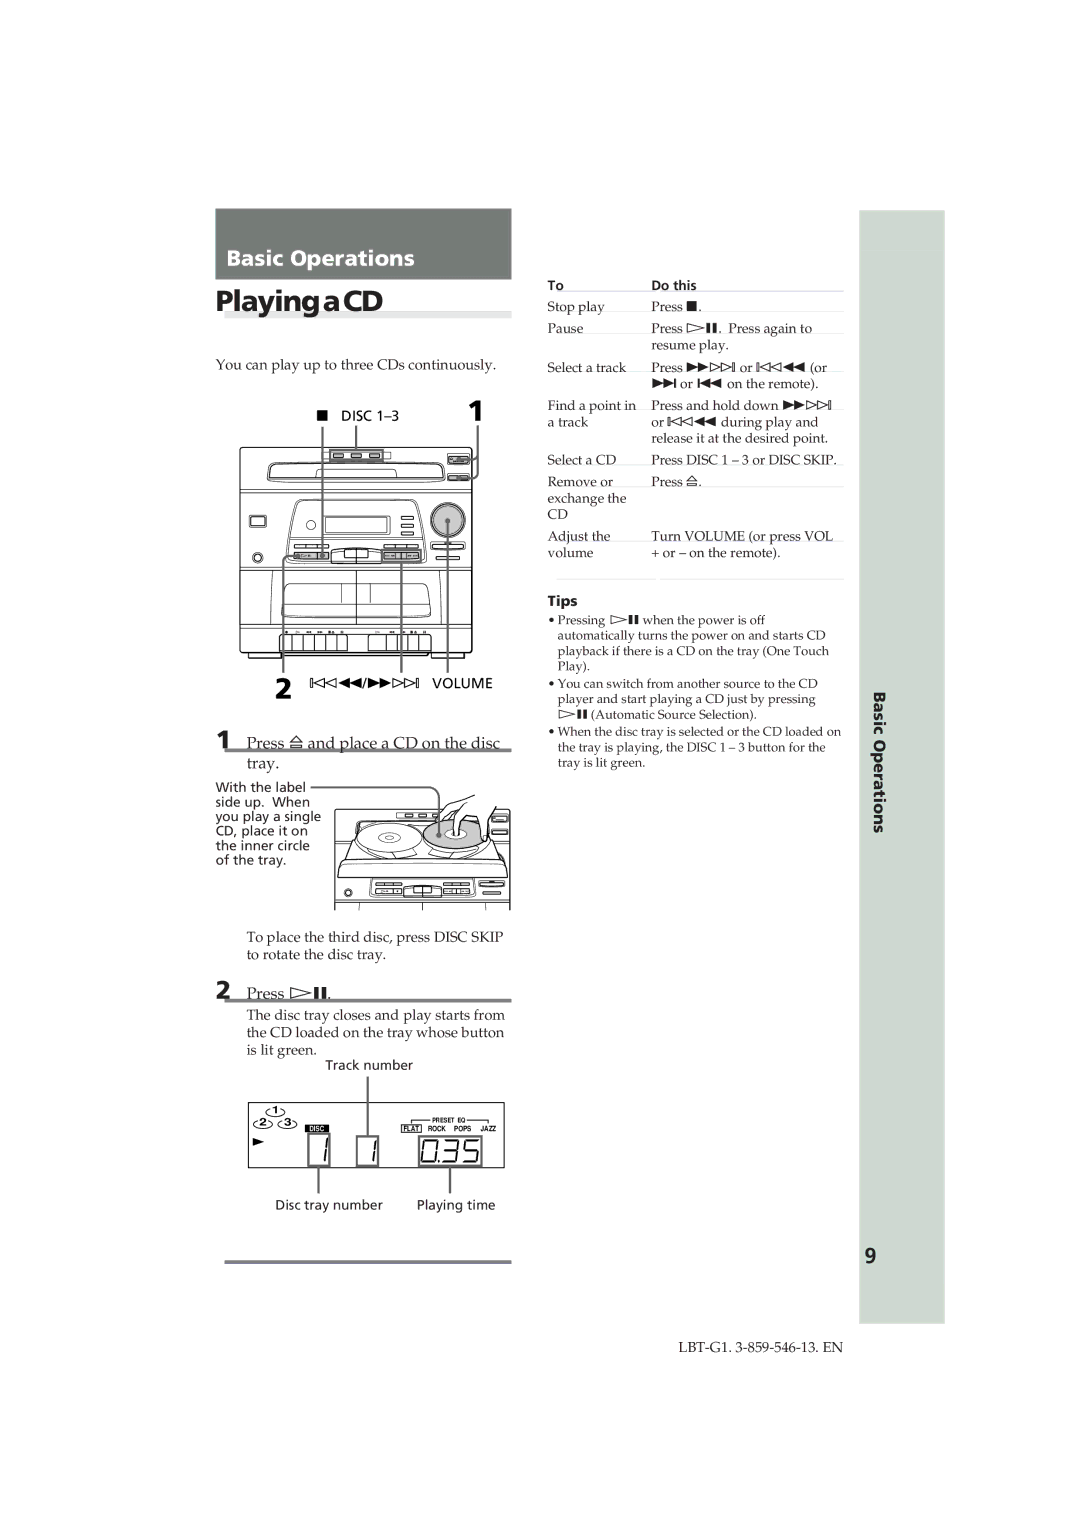 Sony LBT-G1 manual PlayingaCD, Press ¤and place a CD on the disc tray, Press áP, Basic Operations, Tips 